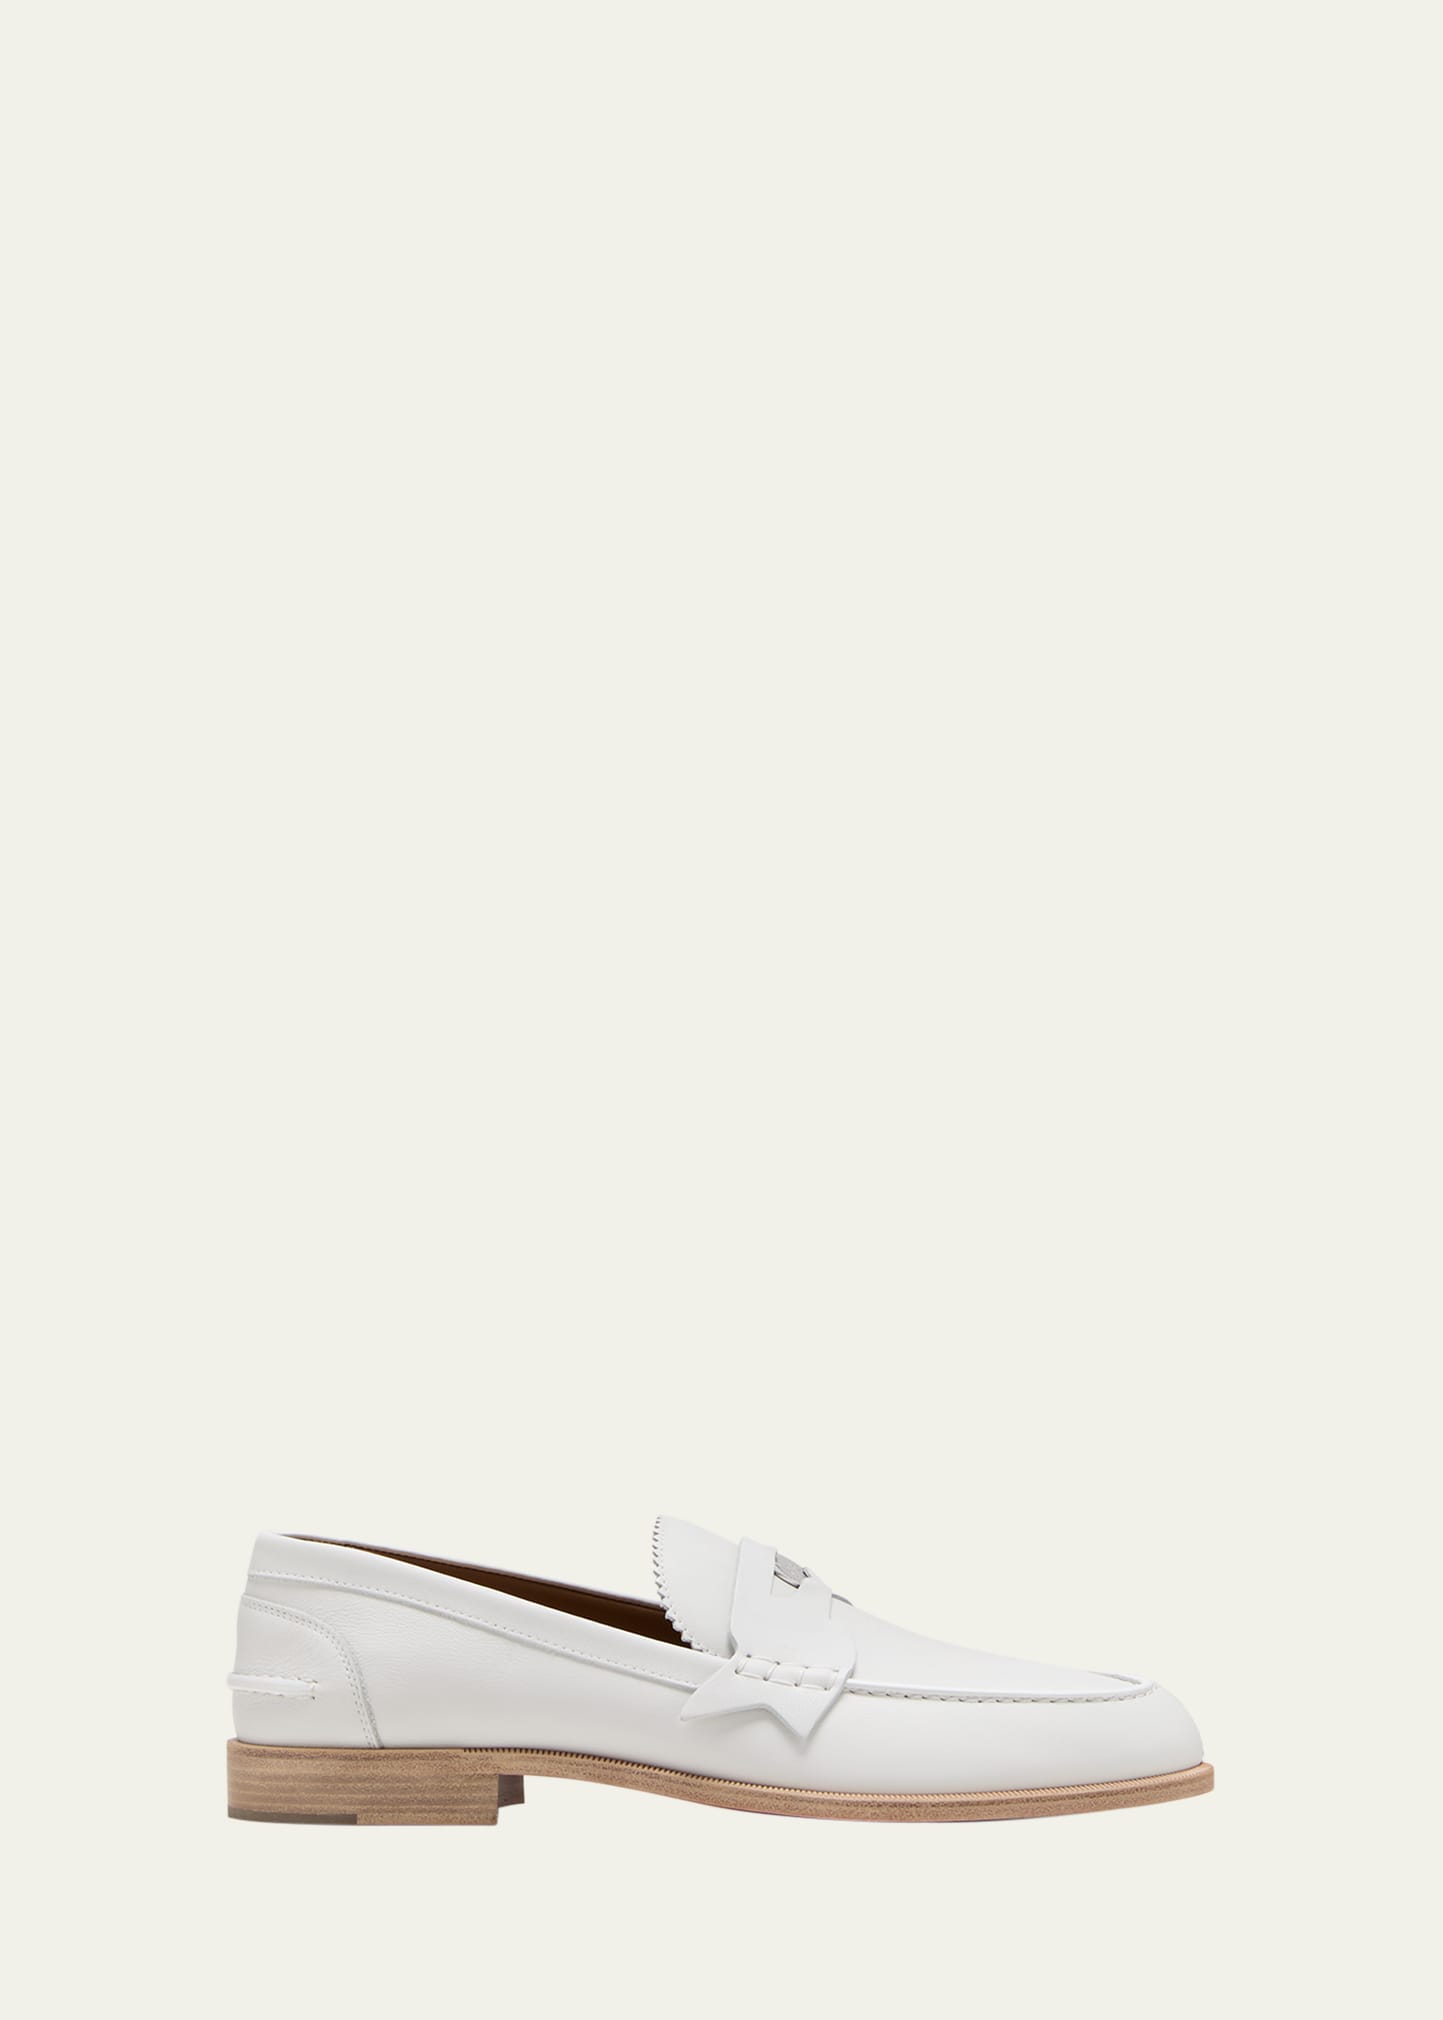 Shop Christian Louboutin Men's Leather Penny Loafers In White